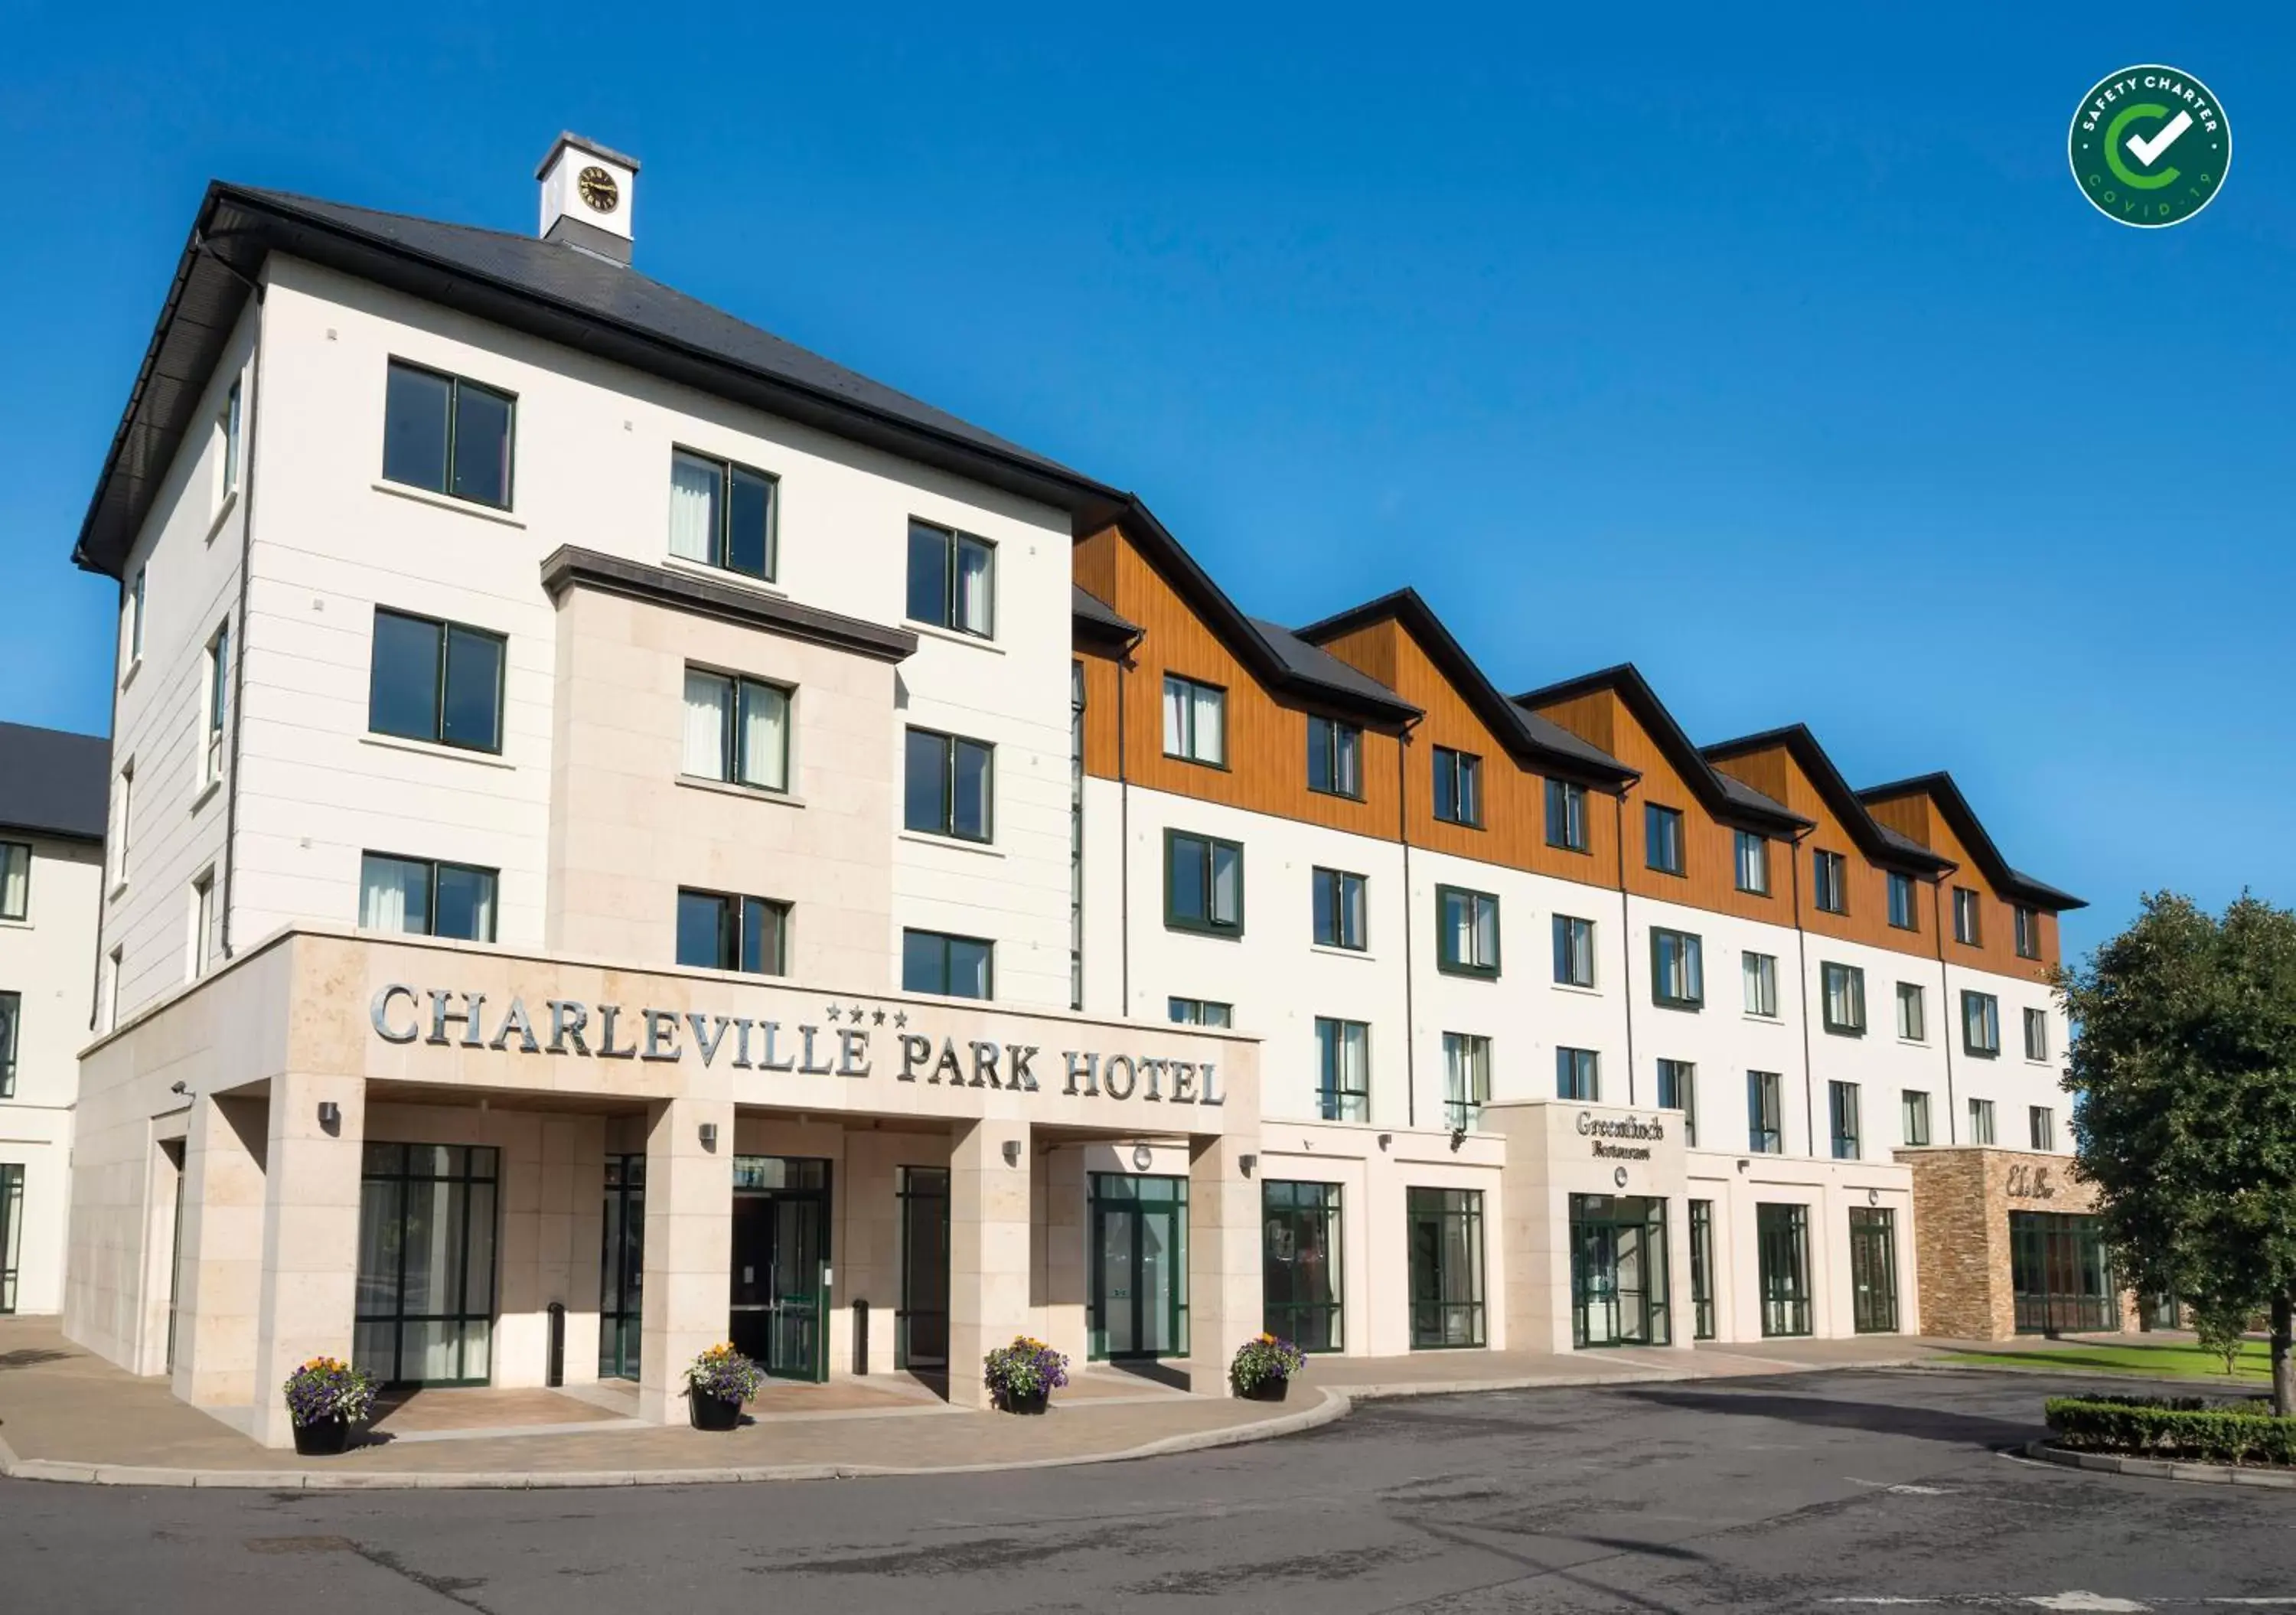 Property building in Charleville Park Hotel & Leisure Club IRELAND